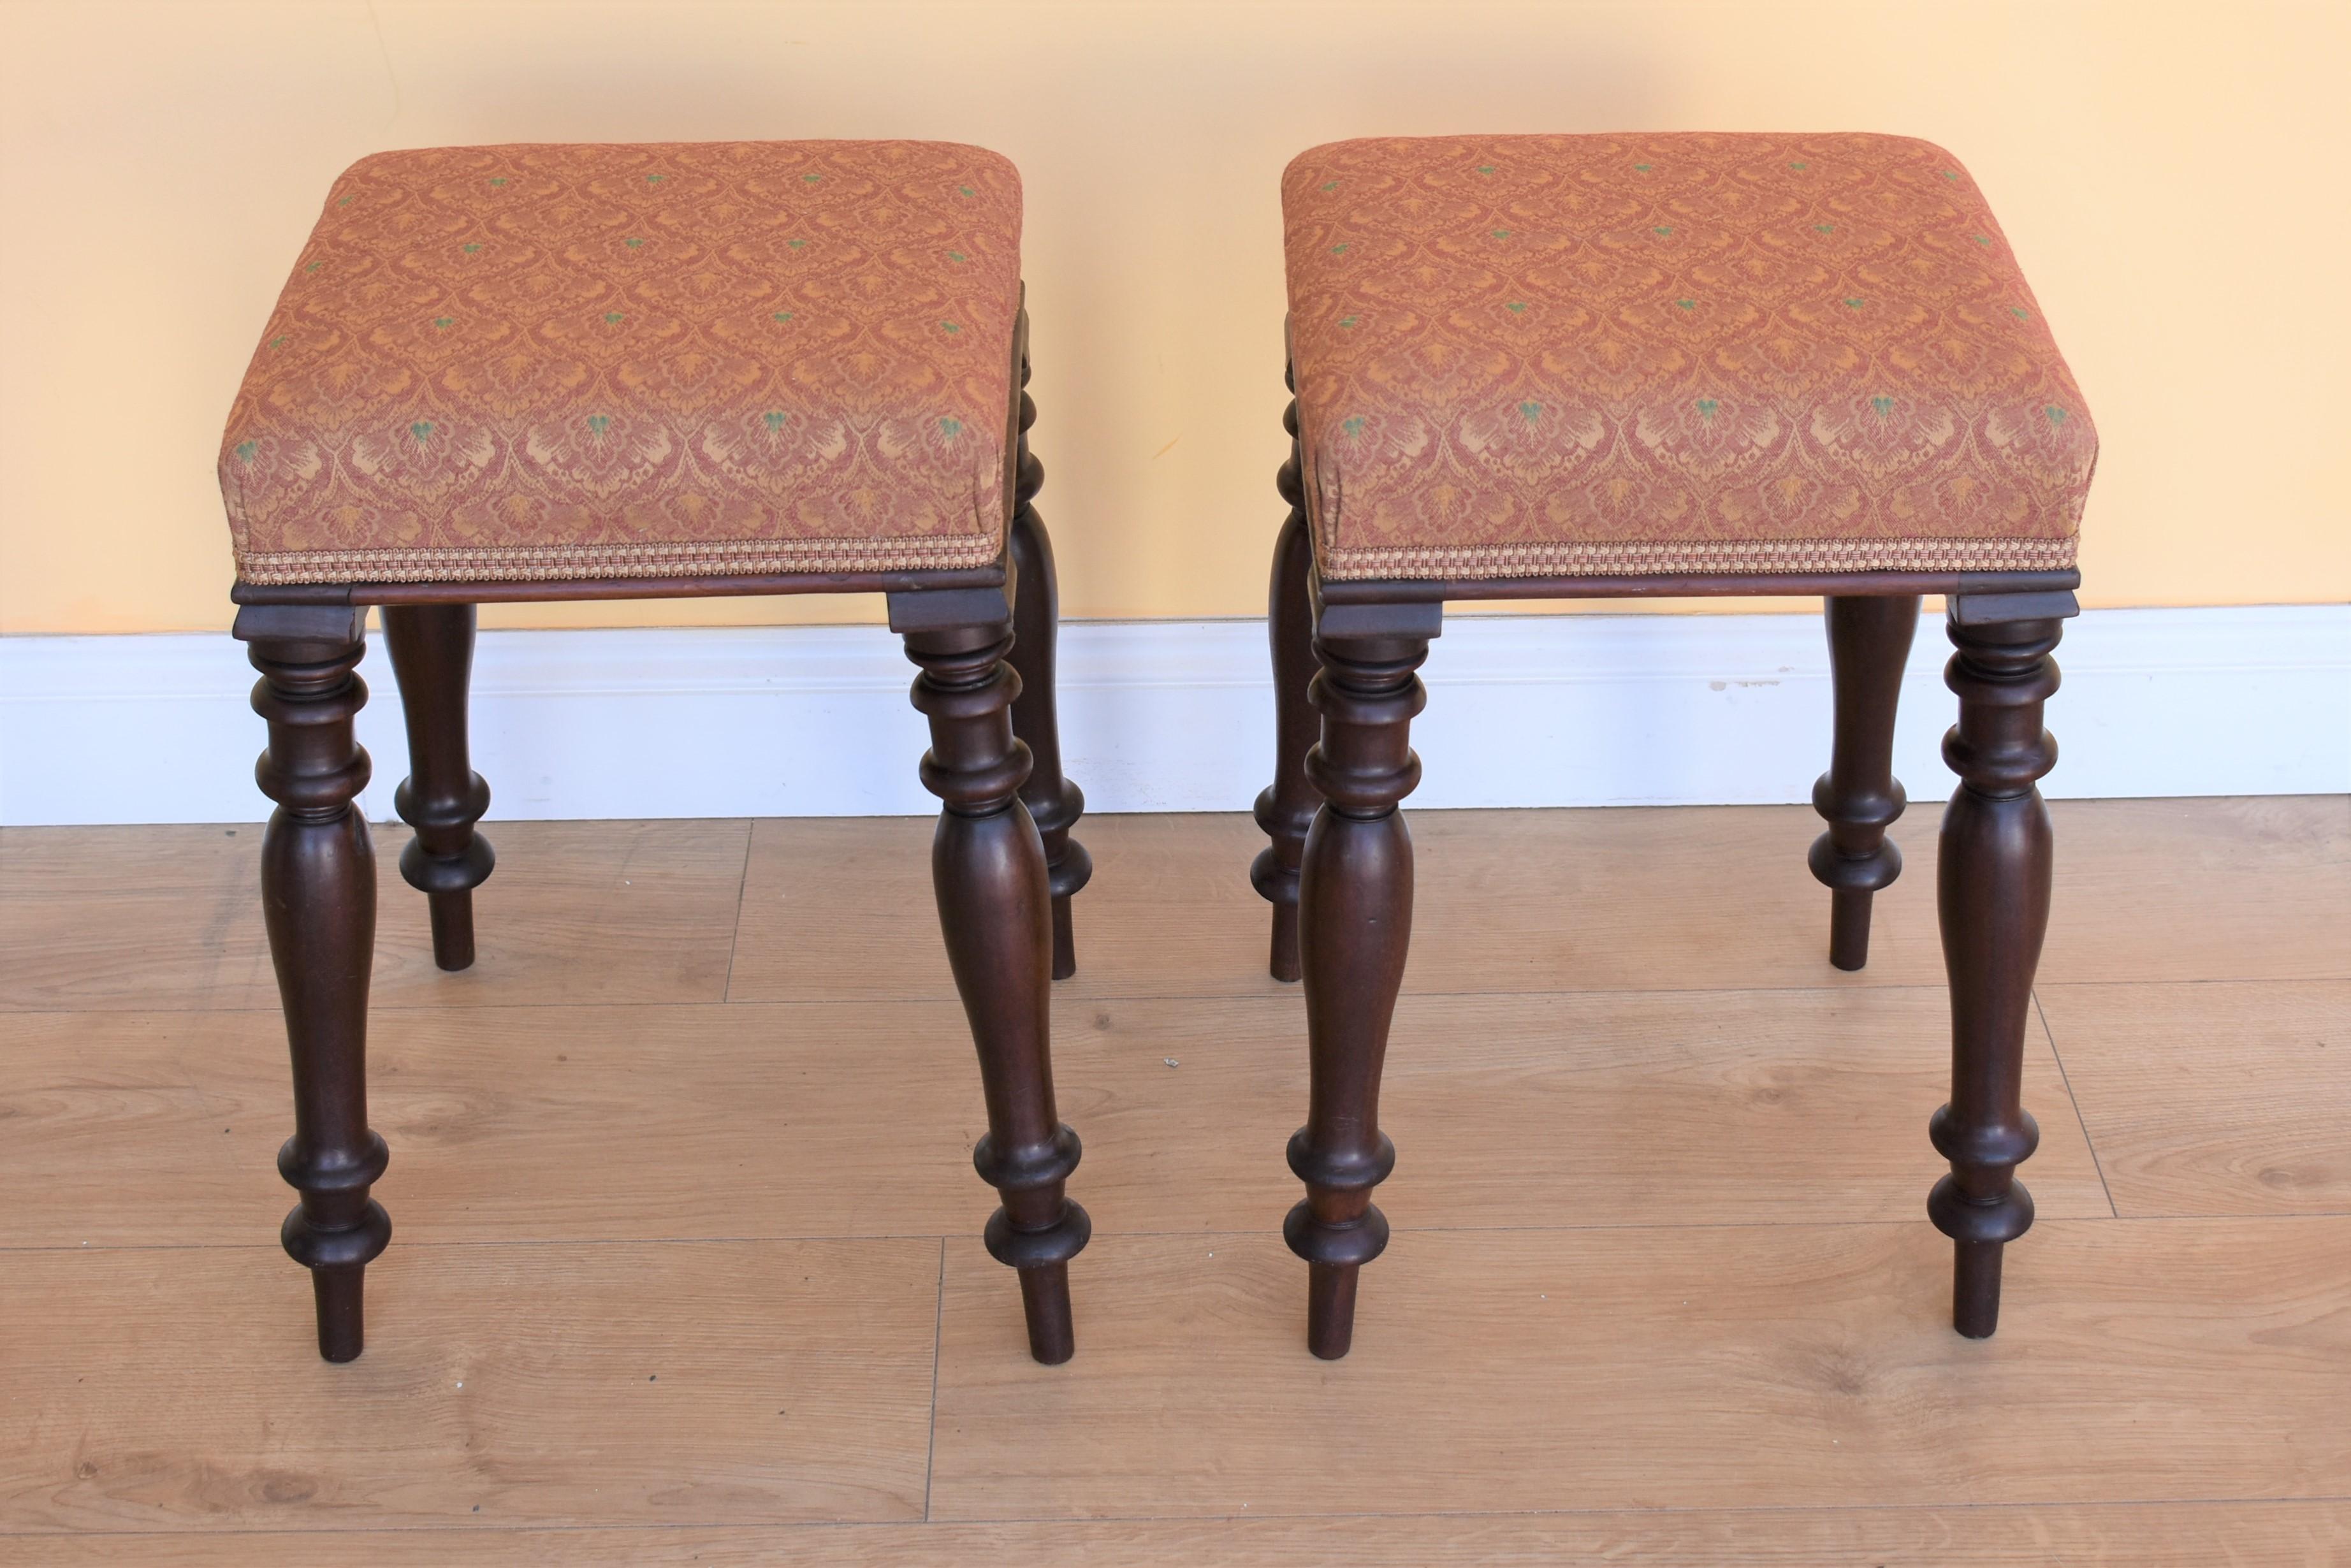 Pair of Victorian mahogany upholstered stools in good condition with turned legs.